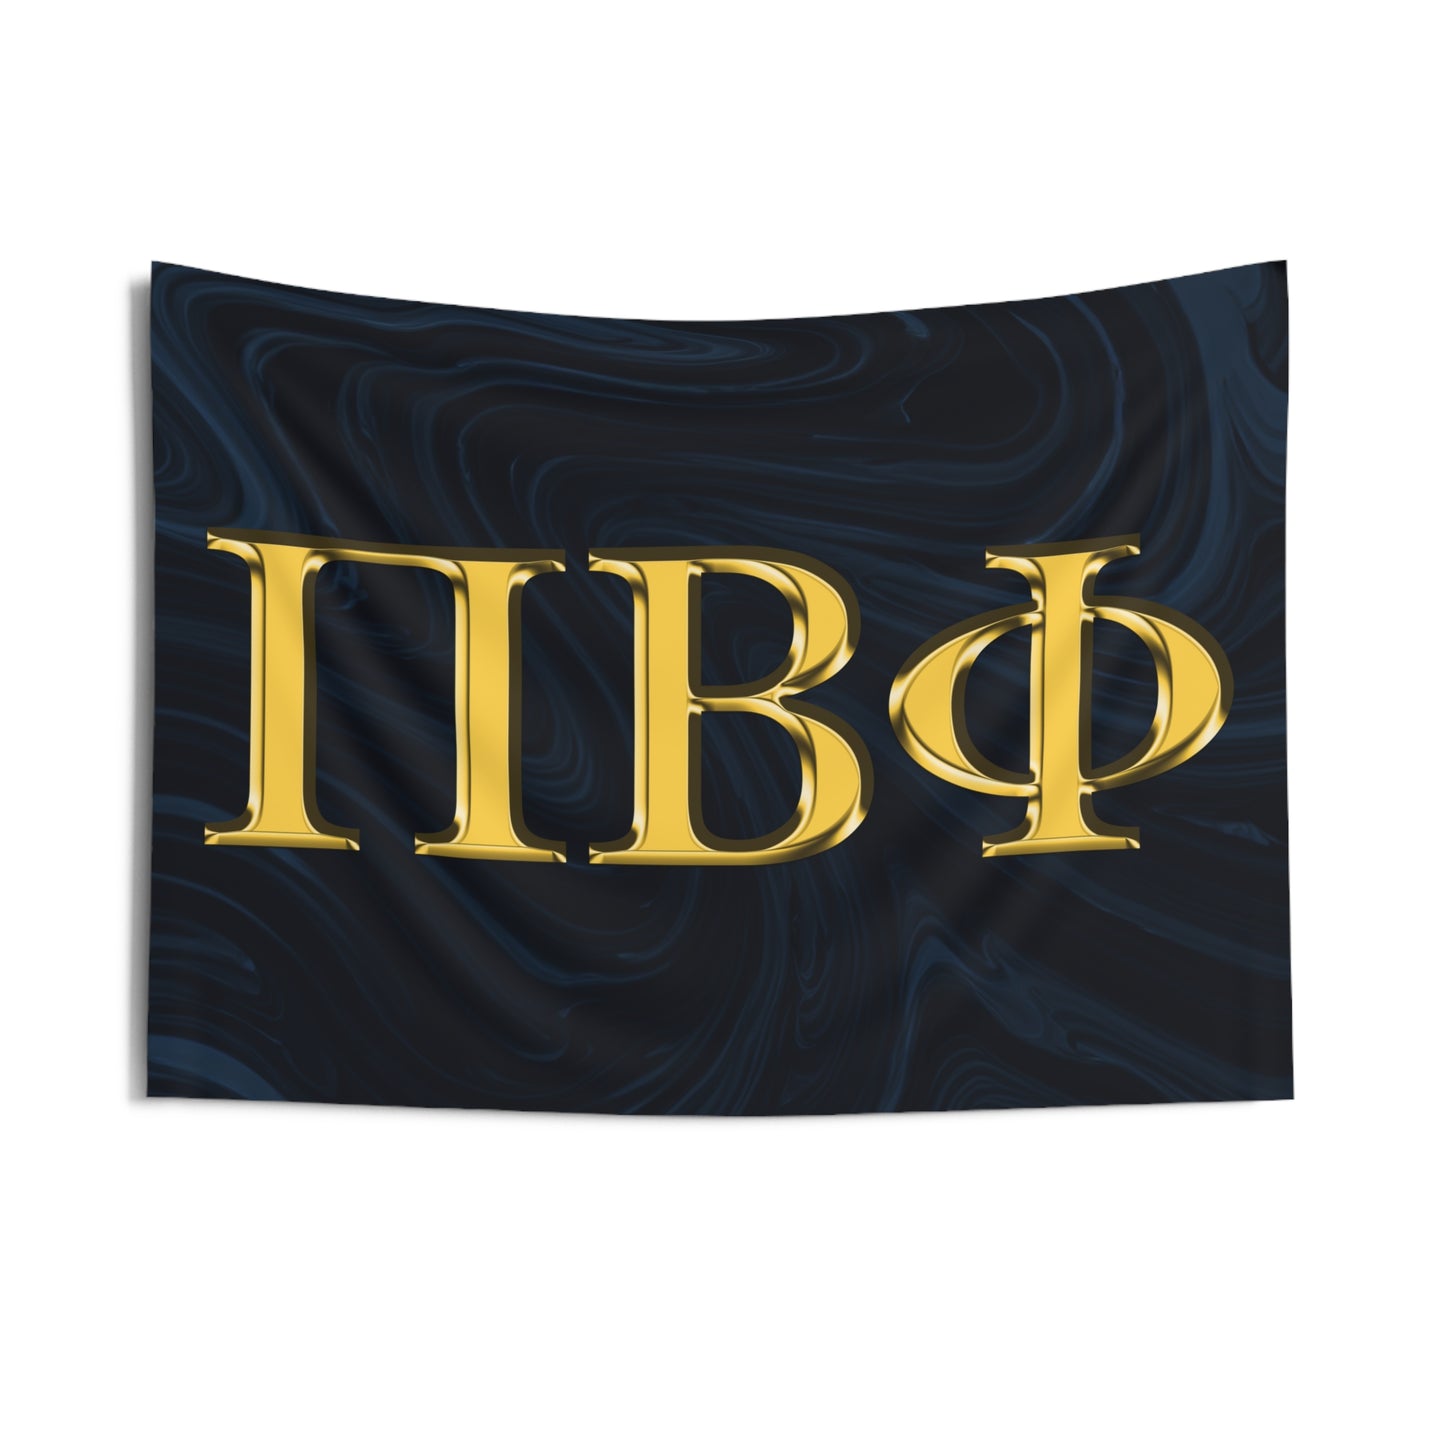 Pi Beta Phi Wall Flag with Navy & Gold Letters Sorority Home Decoration for Dorms & Apartments